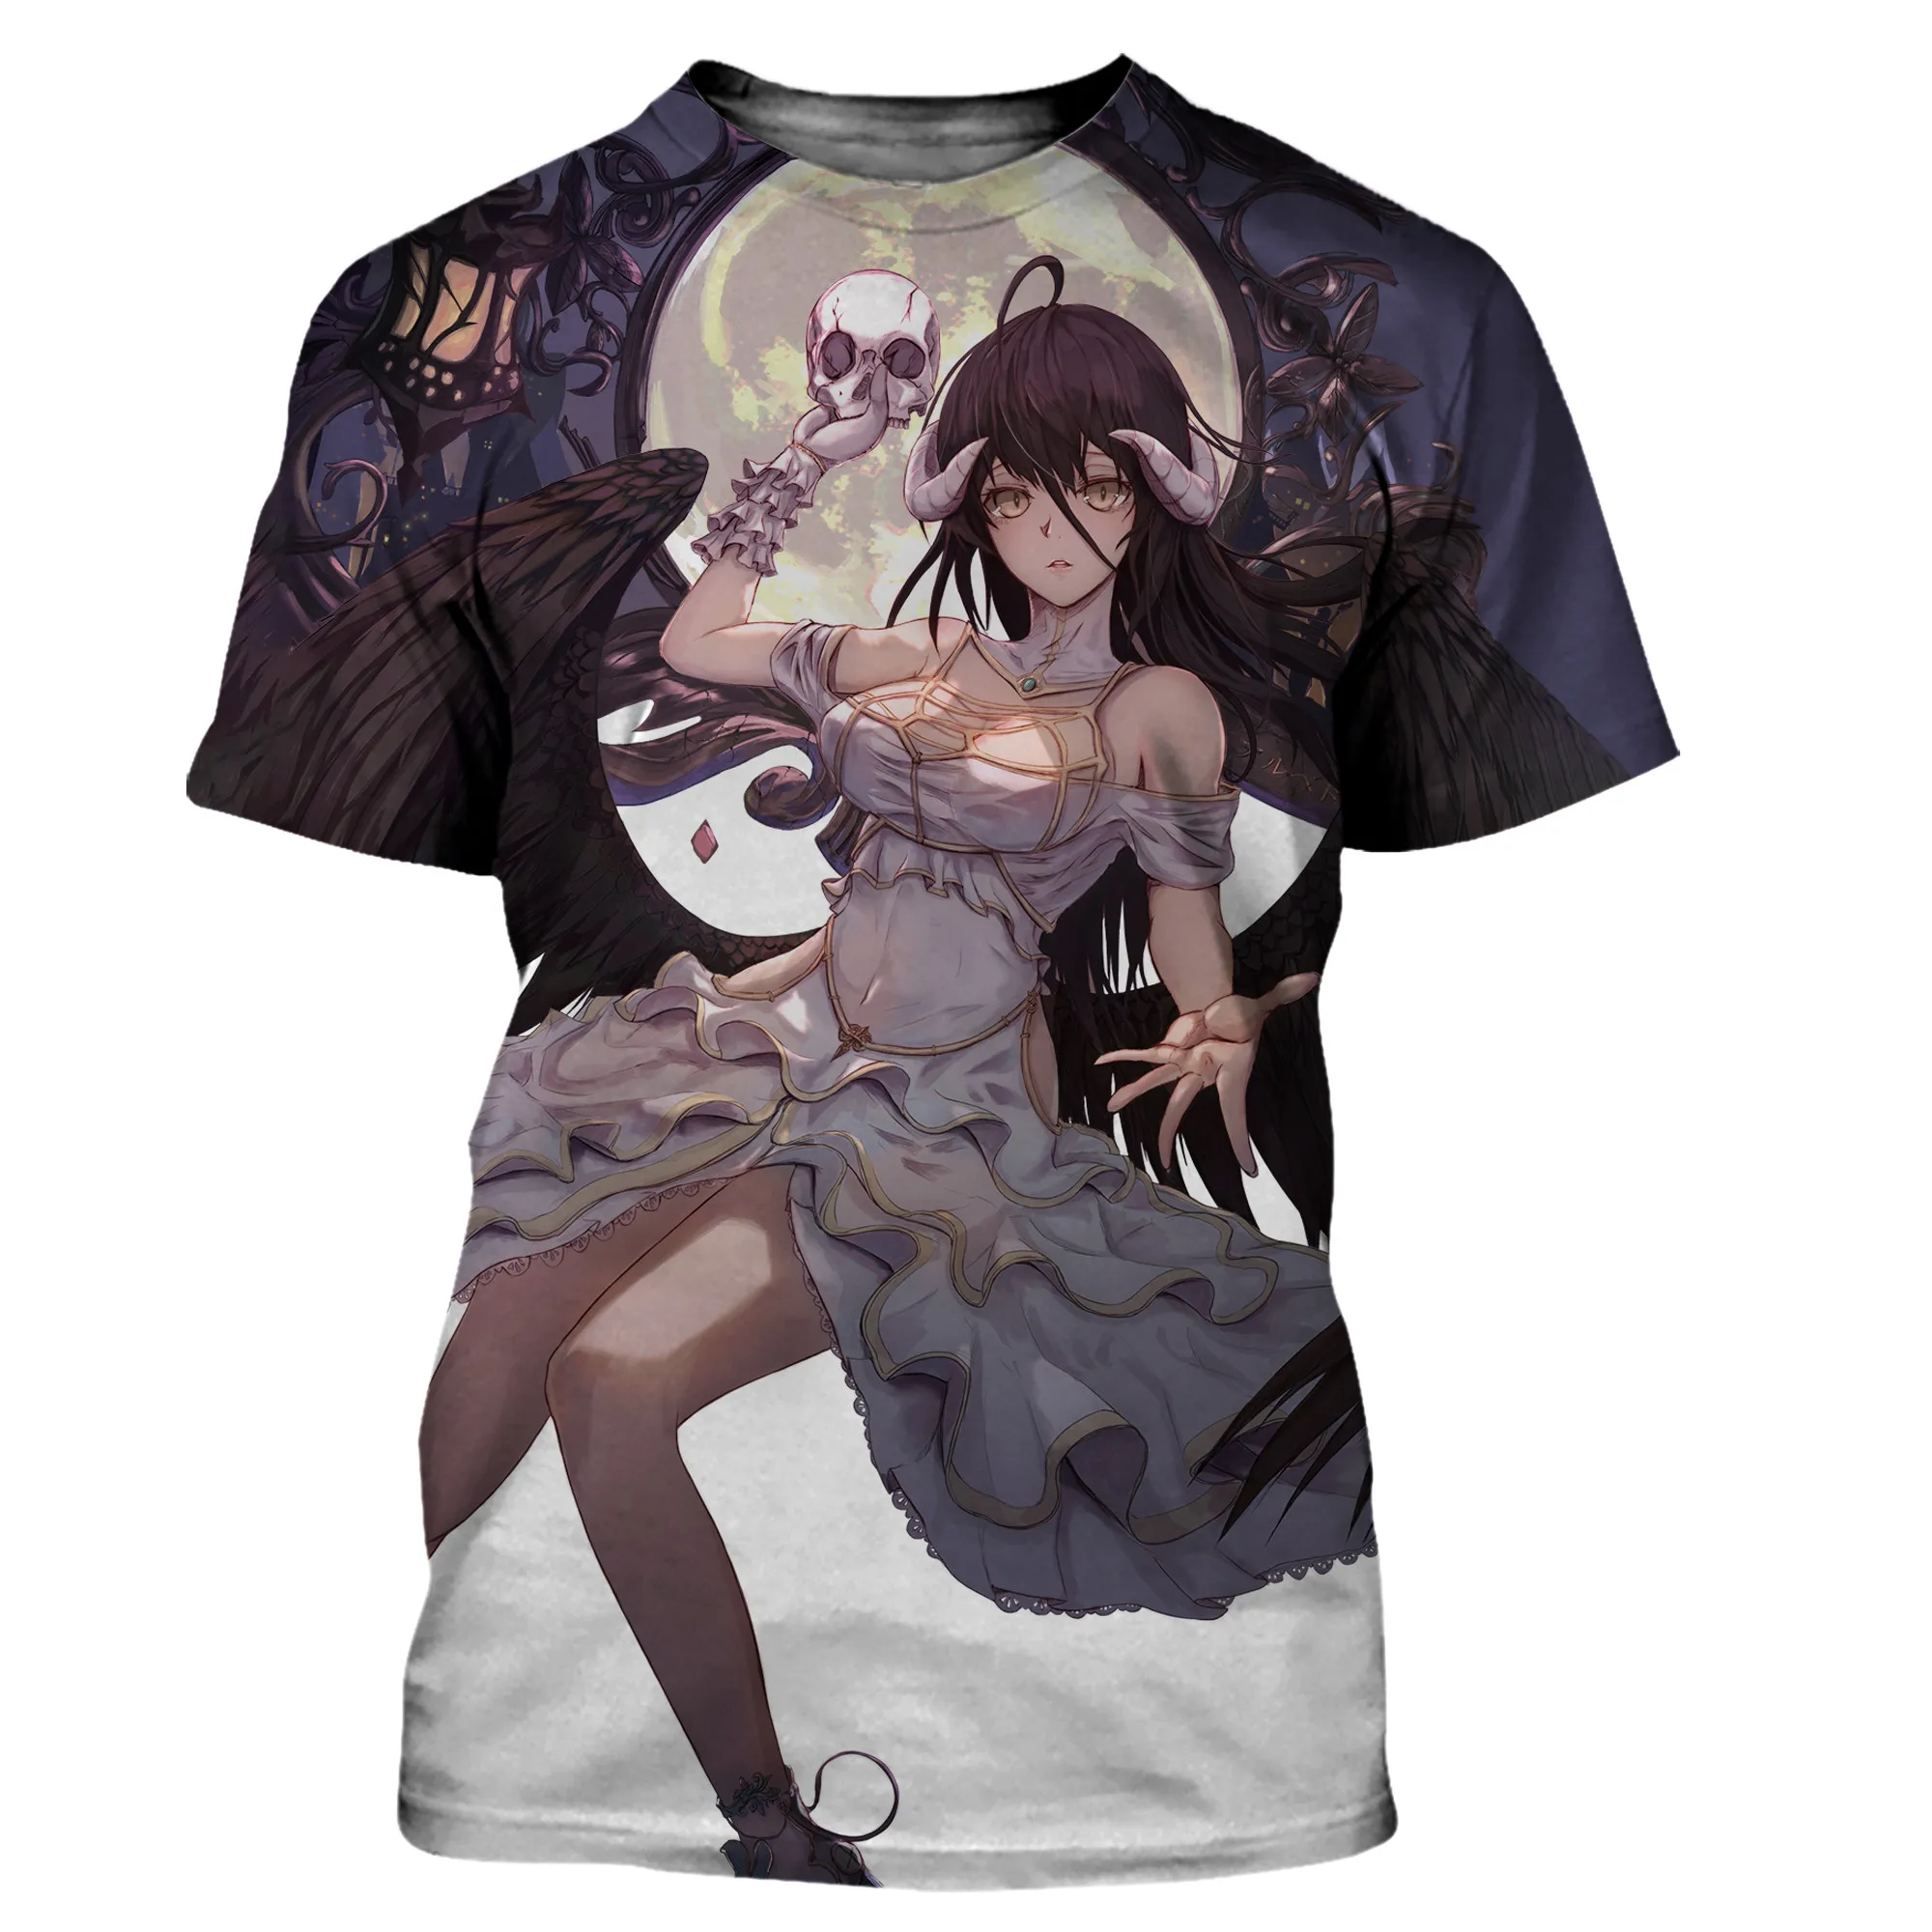 Japan Anime Overlord Albedo 3D Printed T-shirts Men Women New Fashion Cool Casual Style Tshirt Streetwear Tops